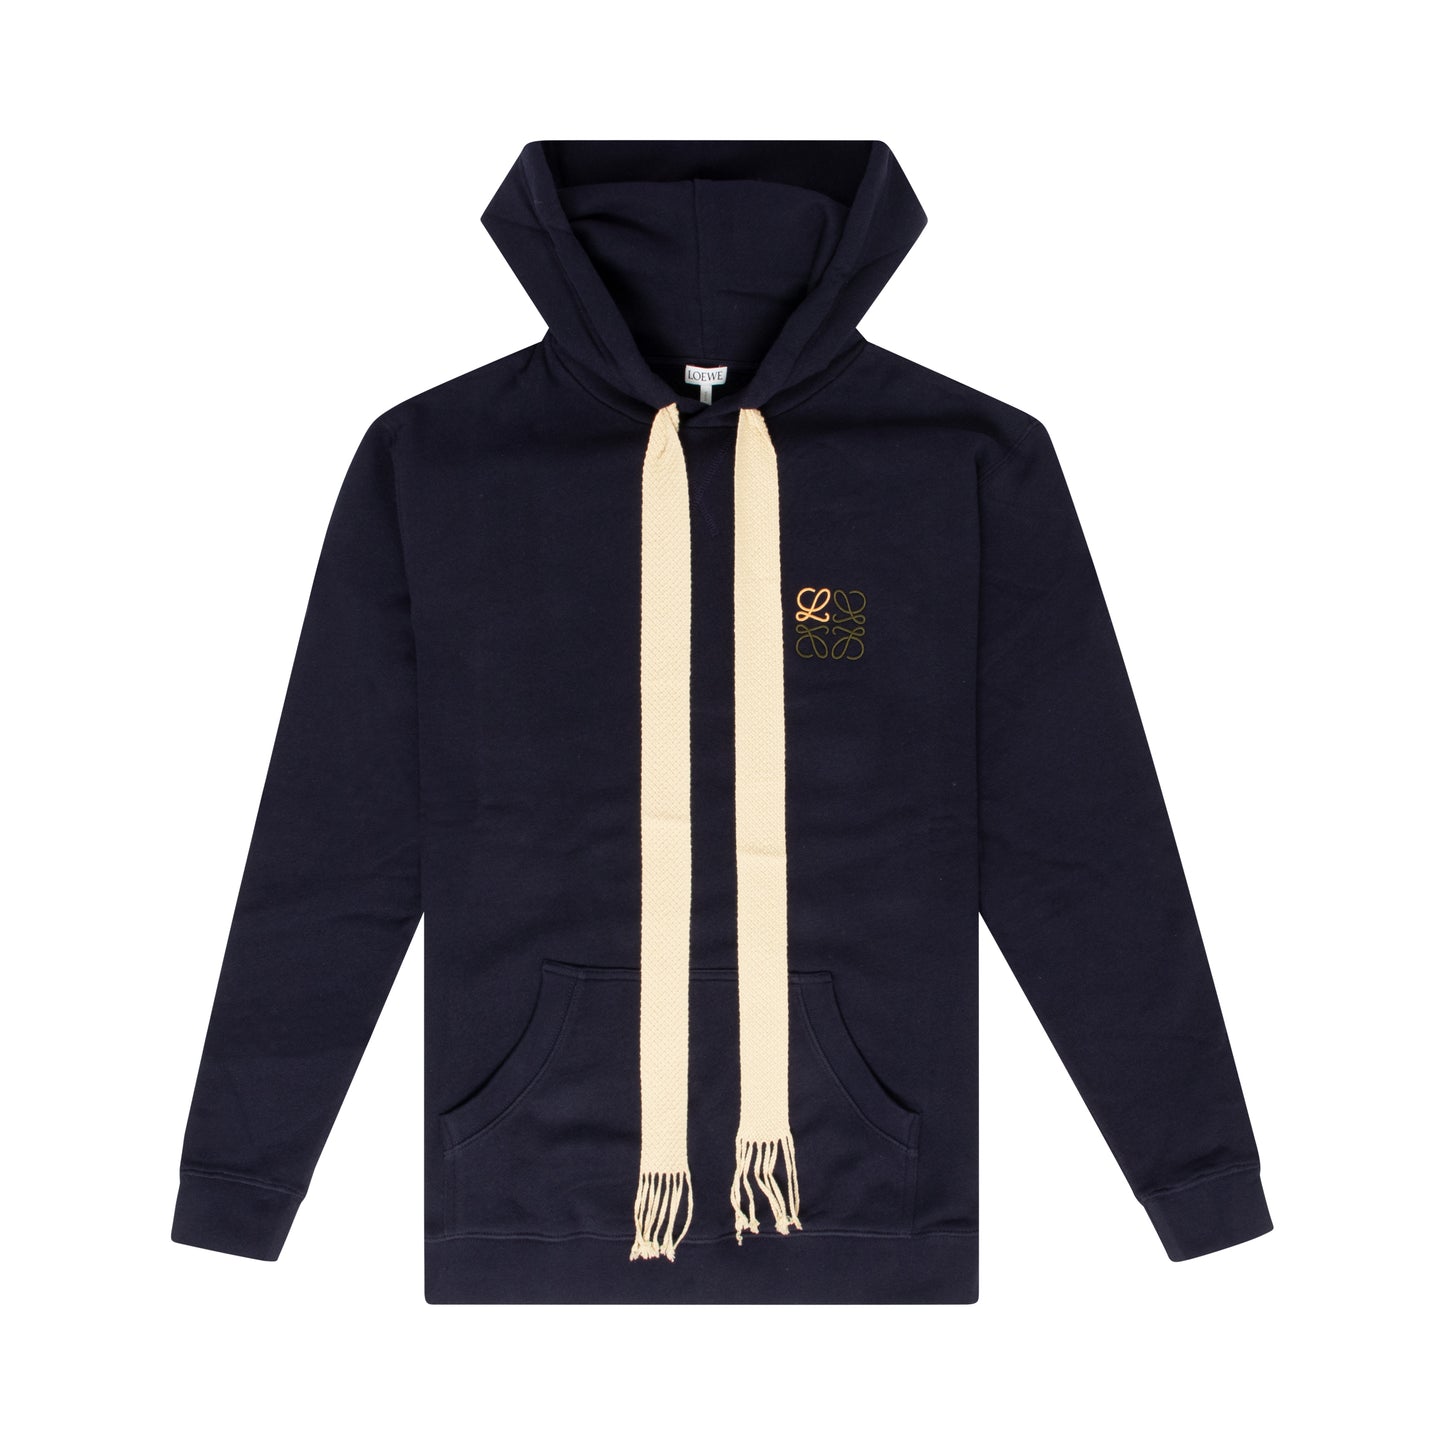 Anagram Embroidered Hoodie in Blue Navy